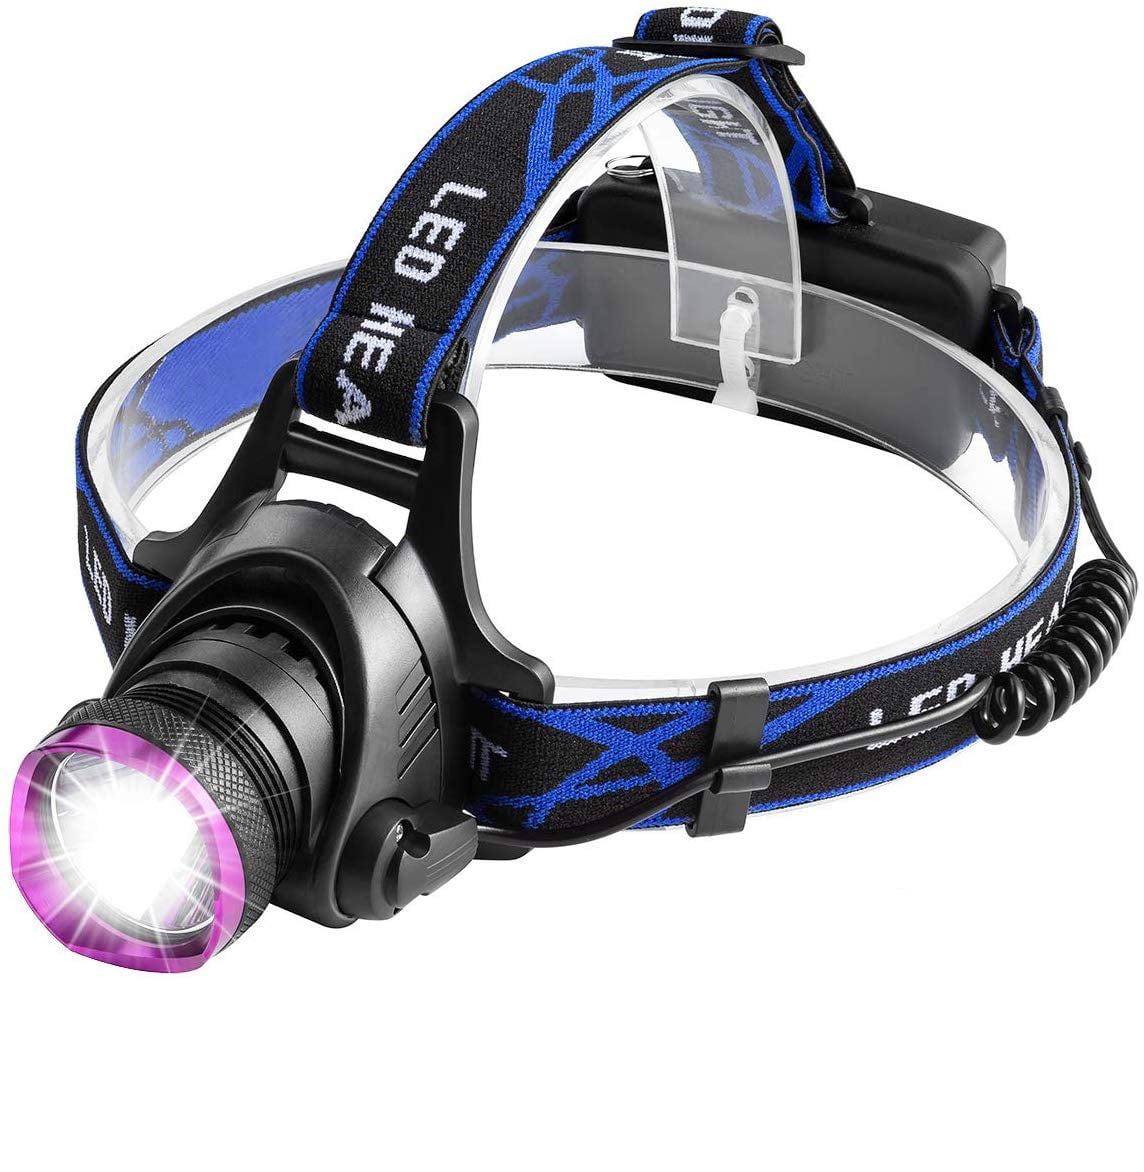 18650 2000LM LED Fishing Headlight Torch T6 Rechargeable Headlamp Charger